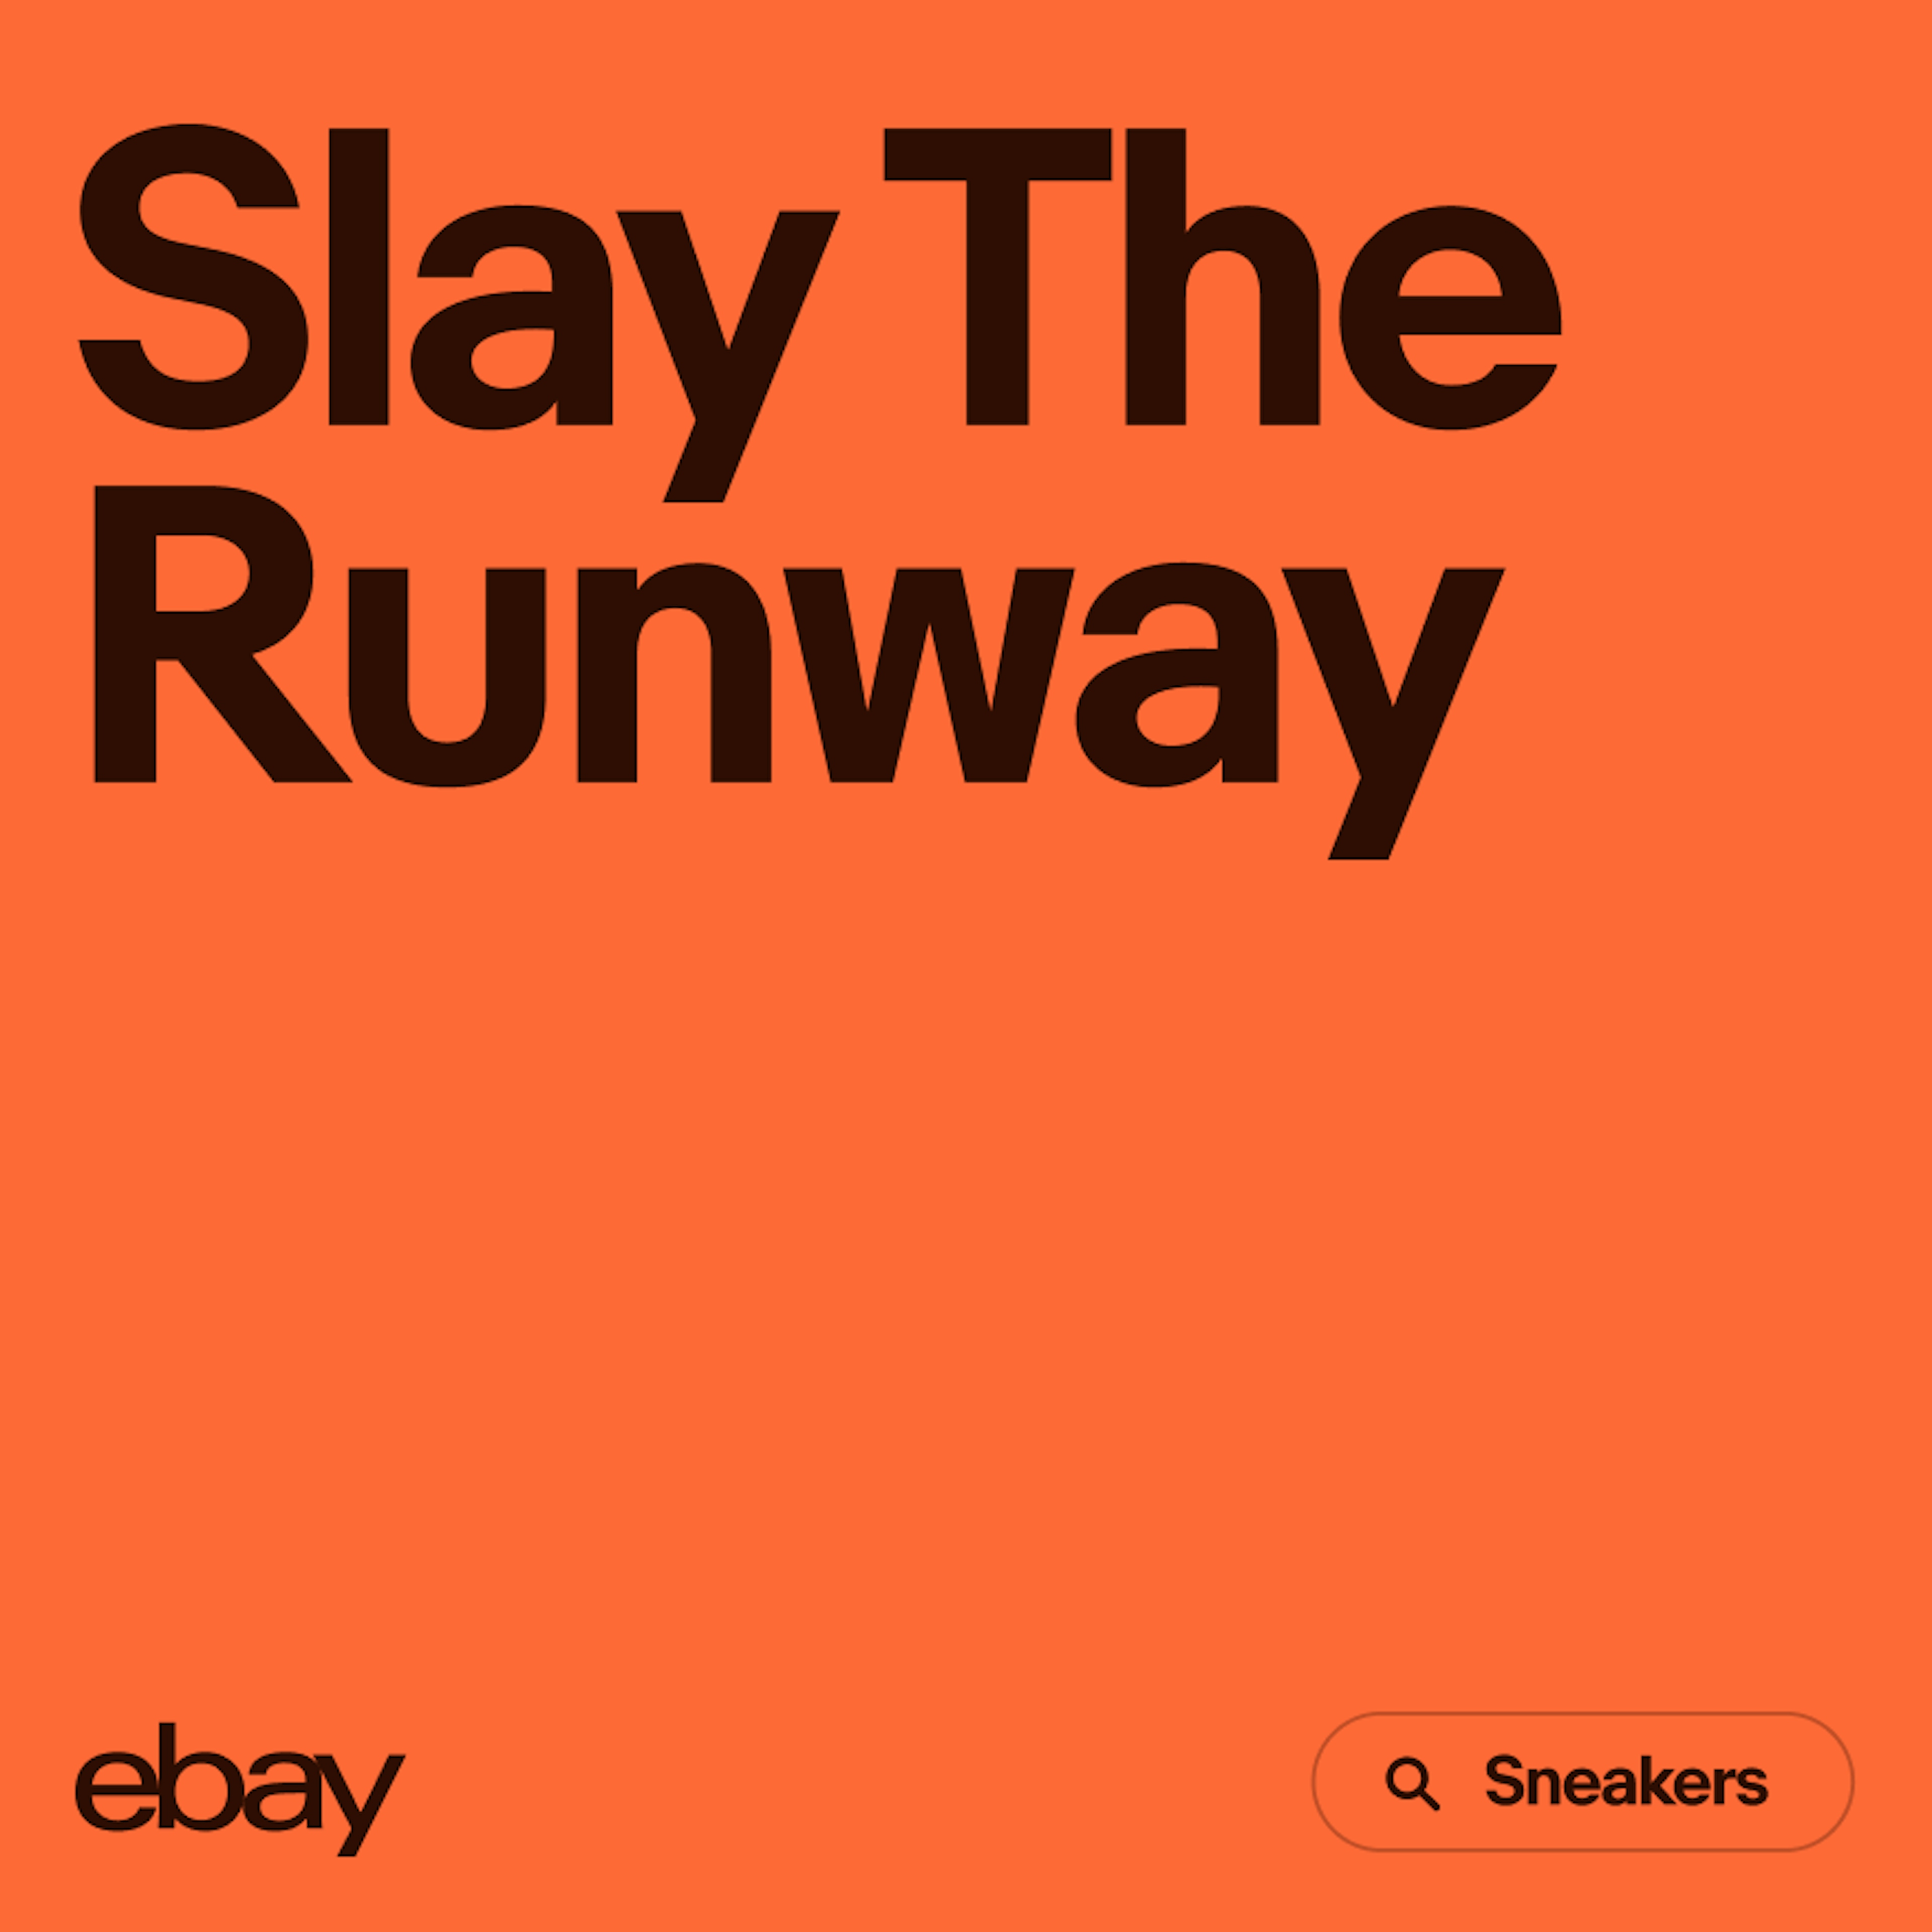 A vibrant orange type-based ad with “Slay The Runway” as the headline.